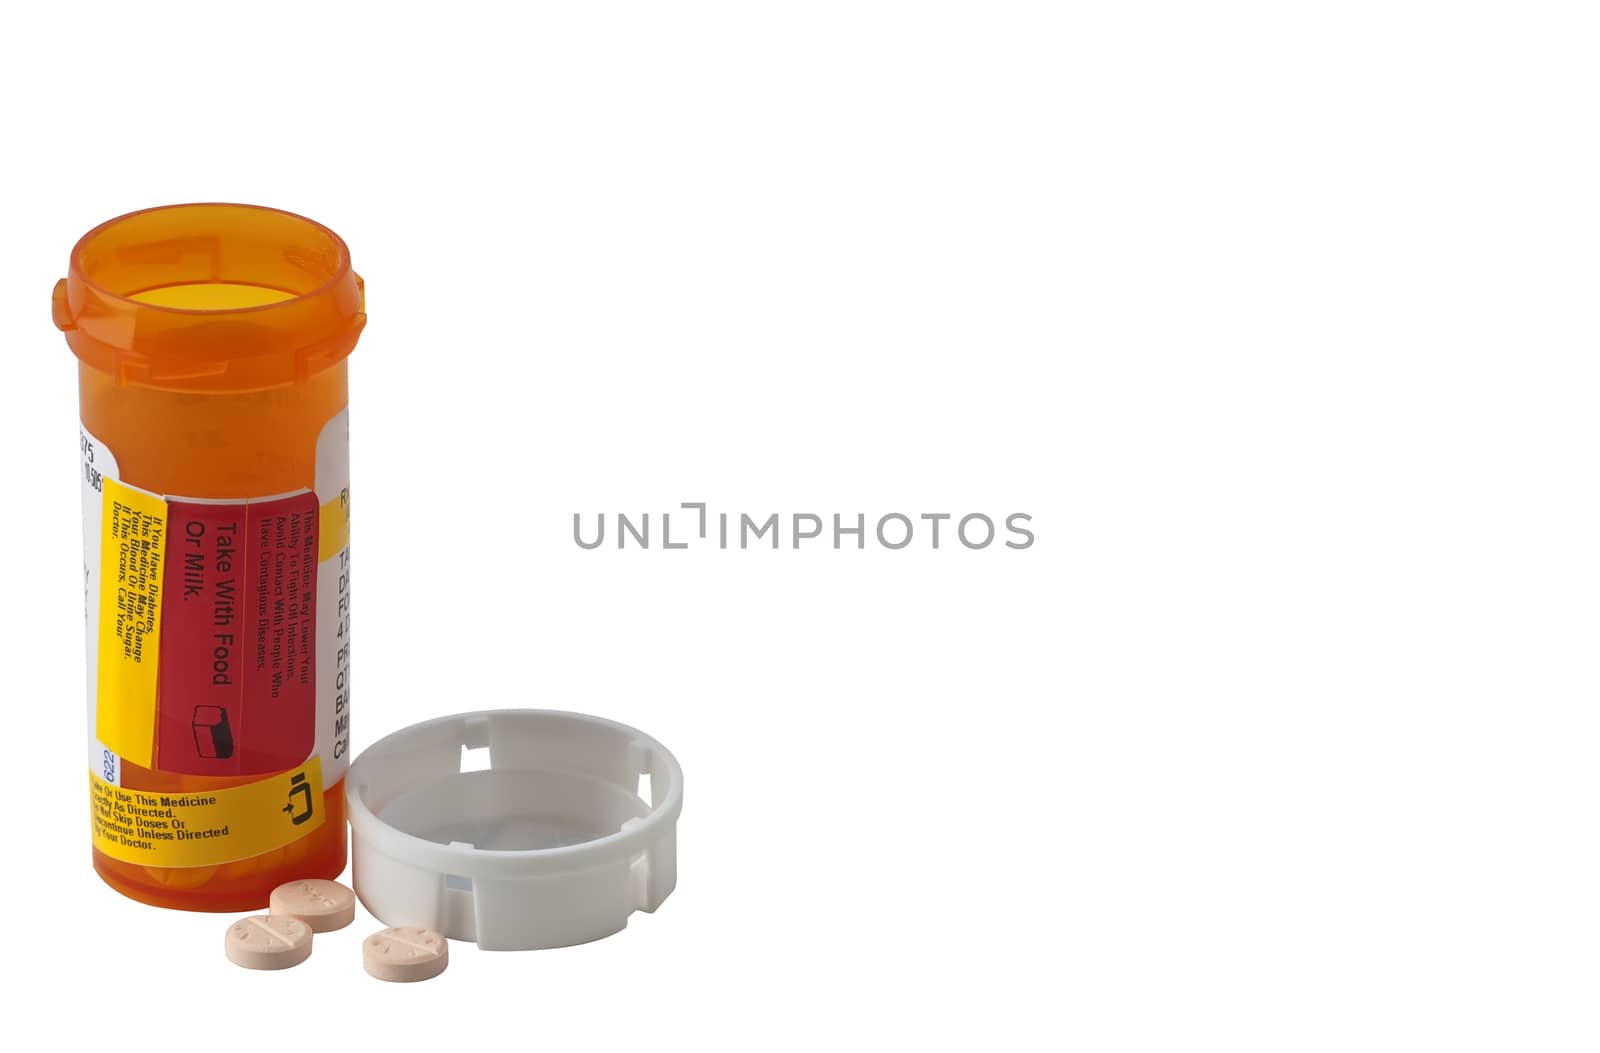 Pill bottle with child proof cap removed and pills on counter by rcarner